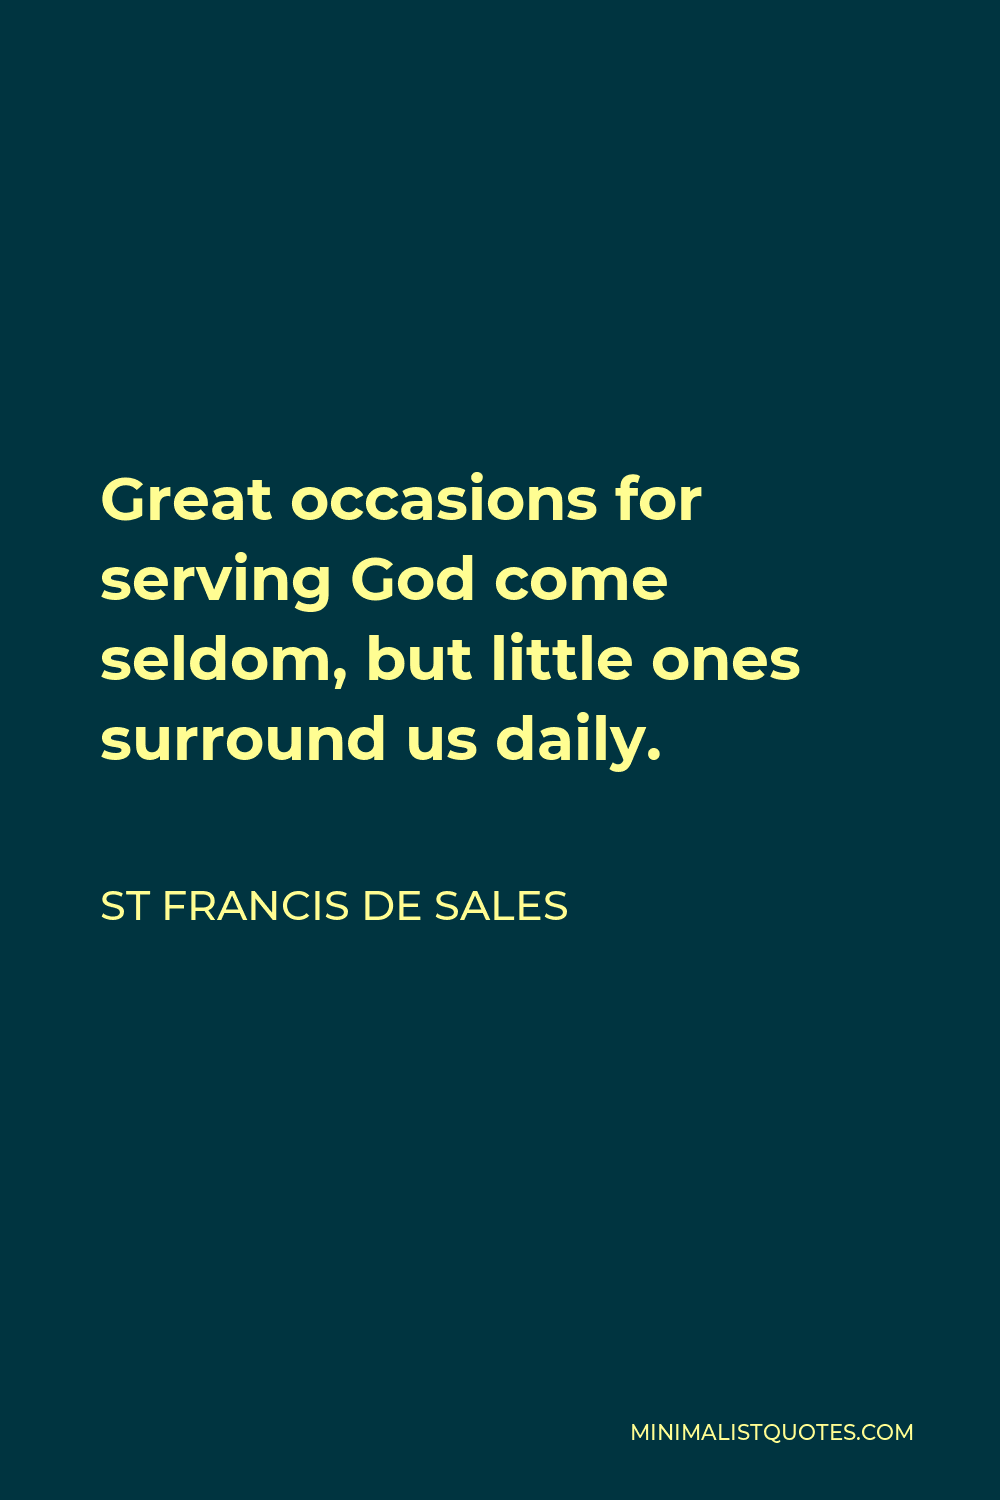 St Francis De Sales Quote - Great occasions for serving God come seldom, but little ones surround us daily.